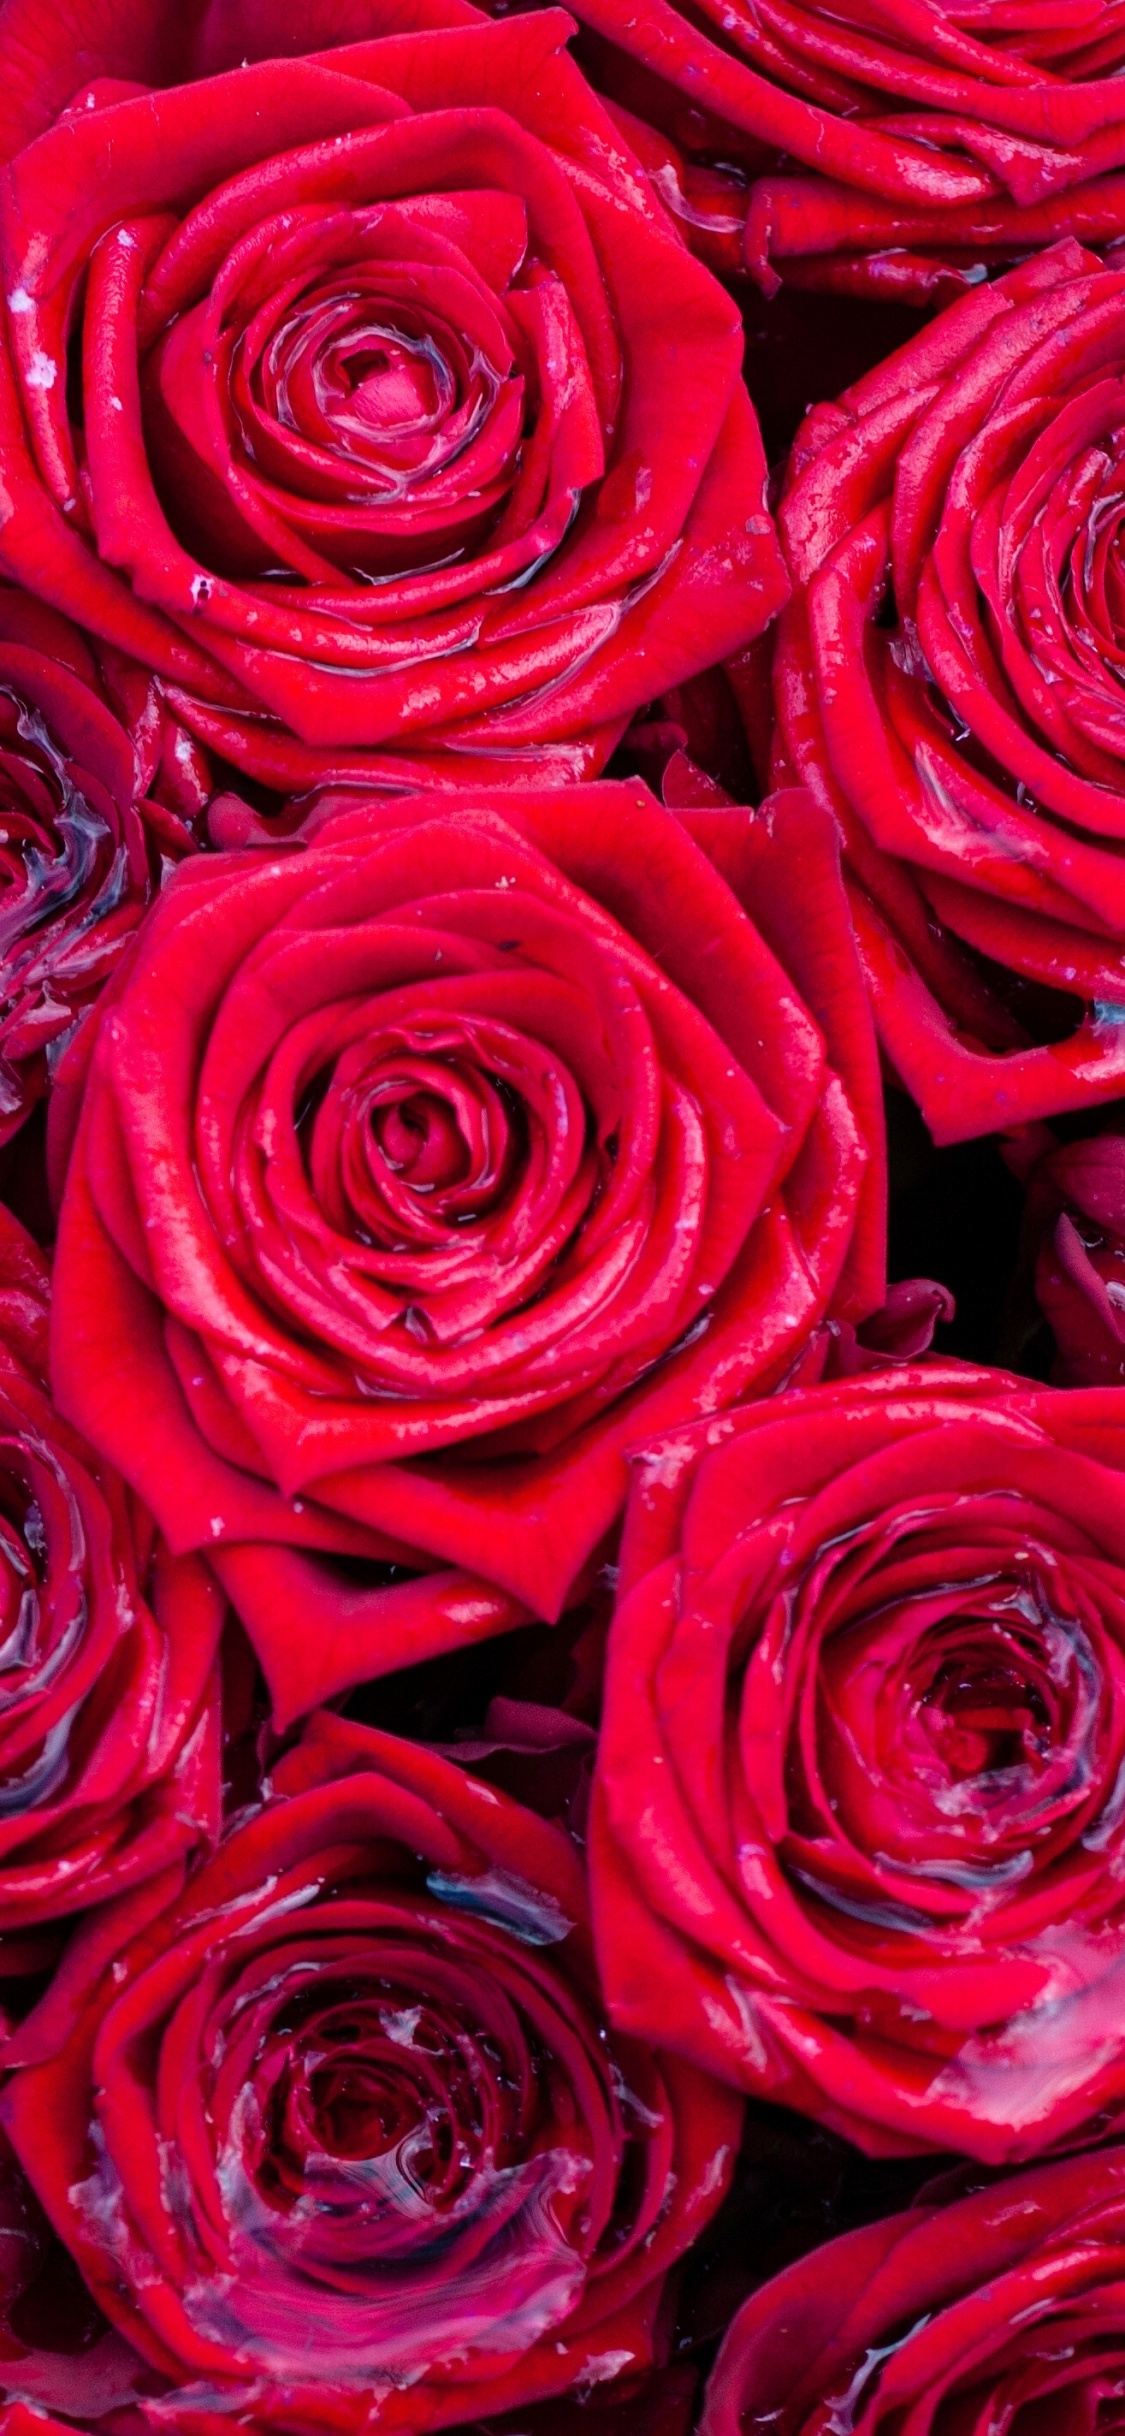 Roses Rouges en Photographie Rapprochée. Wallpaper in 1125x2436 Resolution